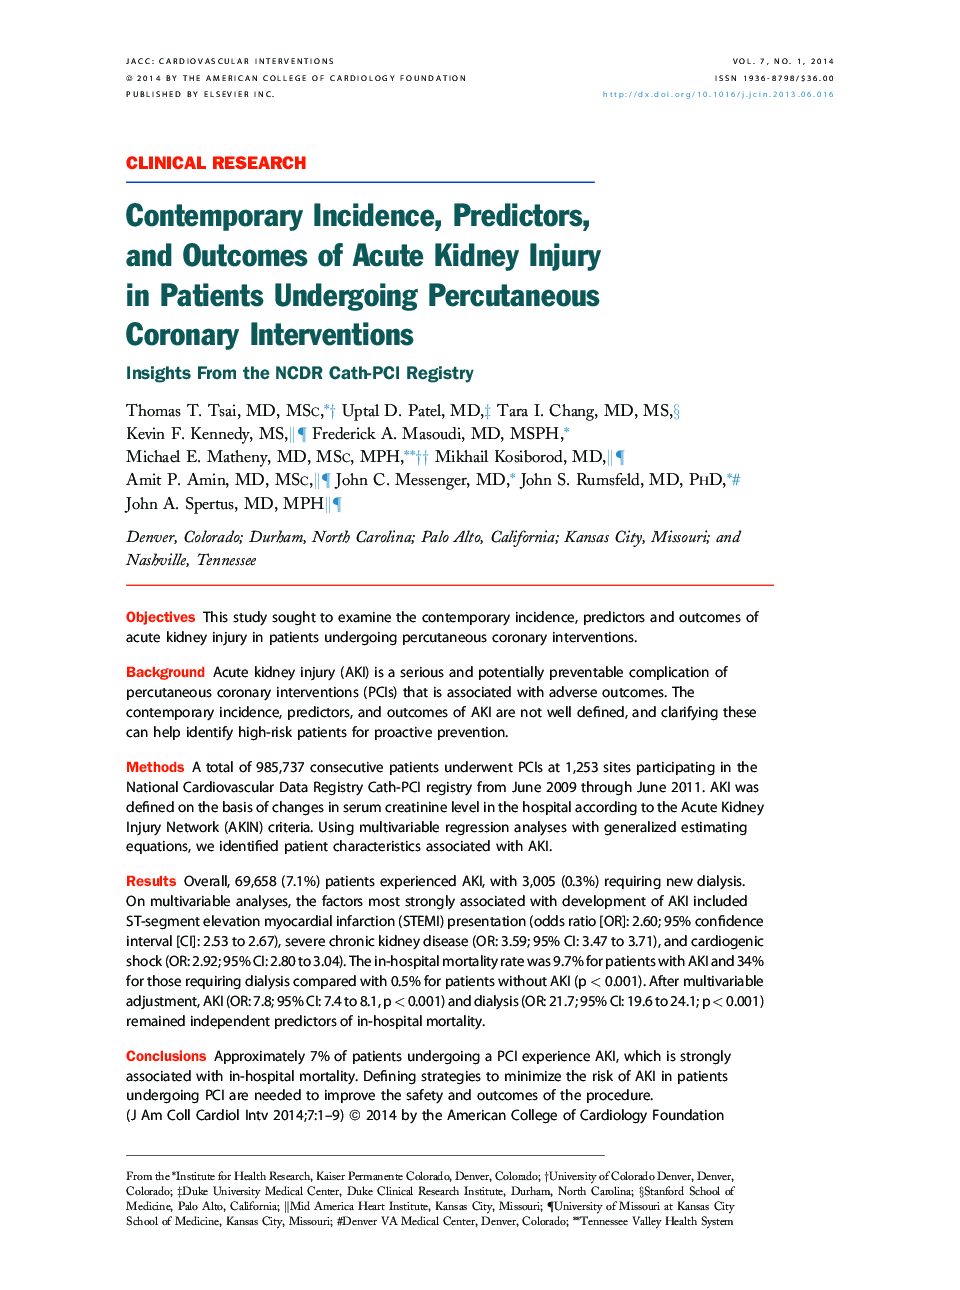 Contemporary Incidence, Predictors, and Outcomes of Acute Kidney Injury in Patients Undergoing Percutaneous Coronary Interventions : Insights From the NCDR Cath-PCI Registry